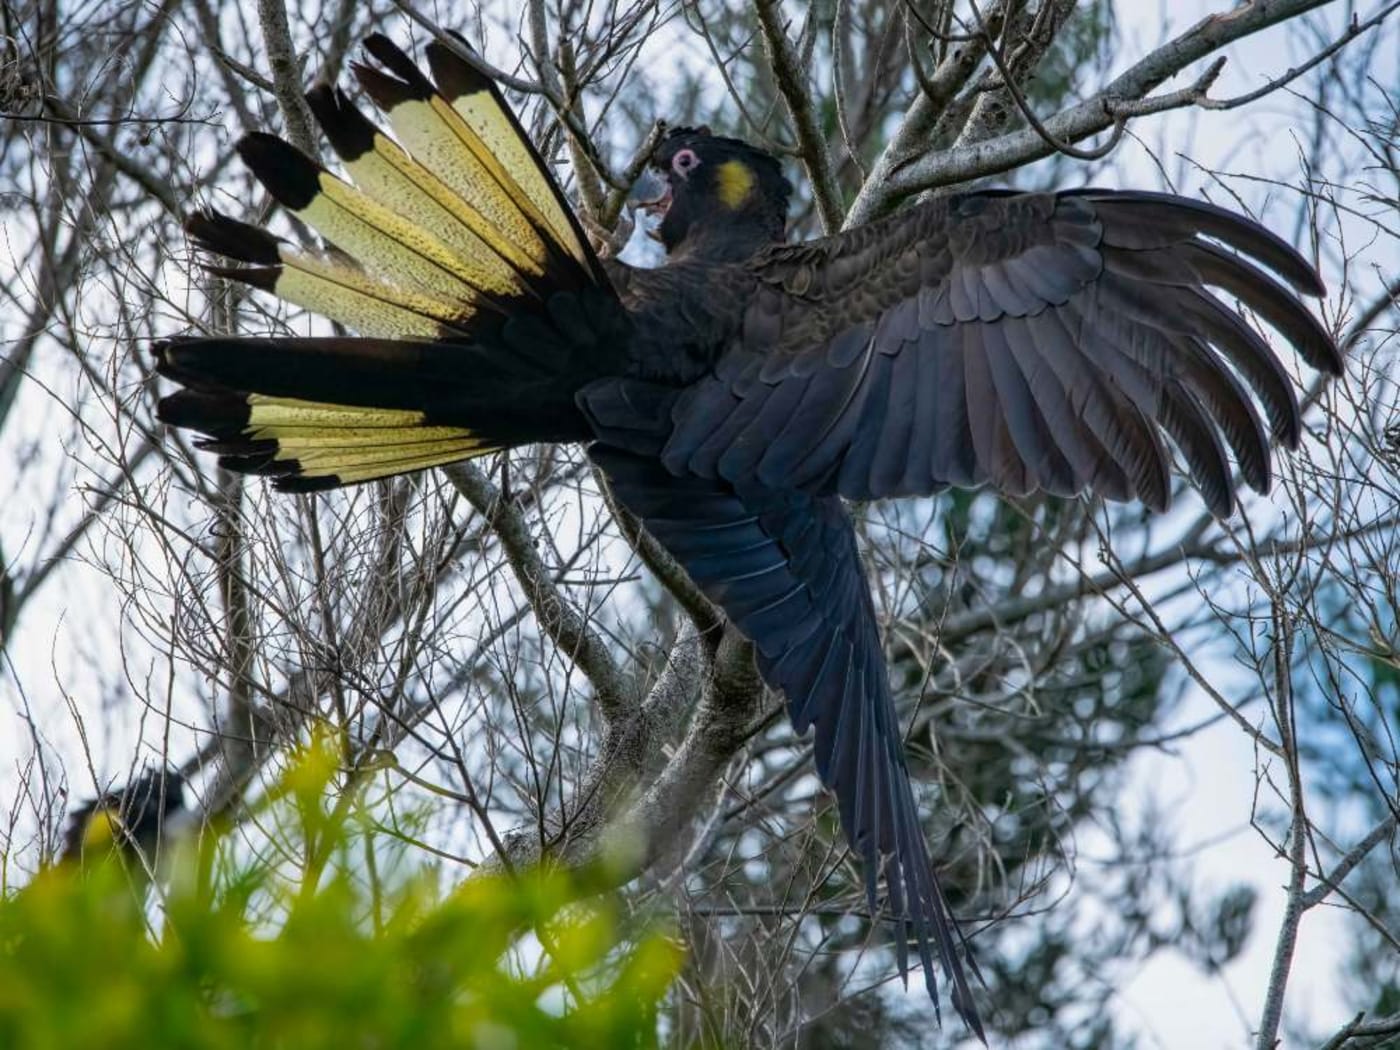 A male yellow-tailed black-cockatoo hangs upside down on a tree branch while it spreads its wings and tail.